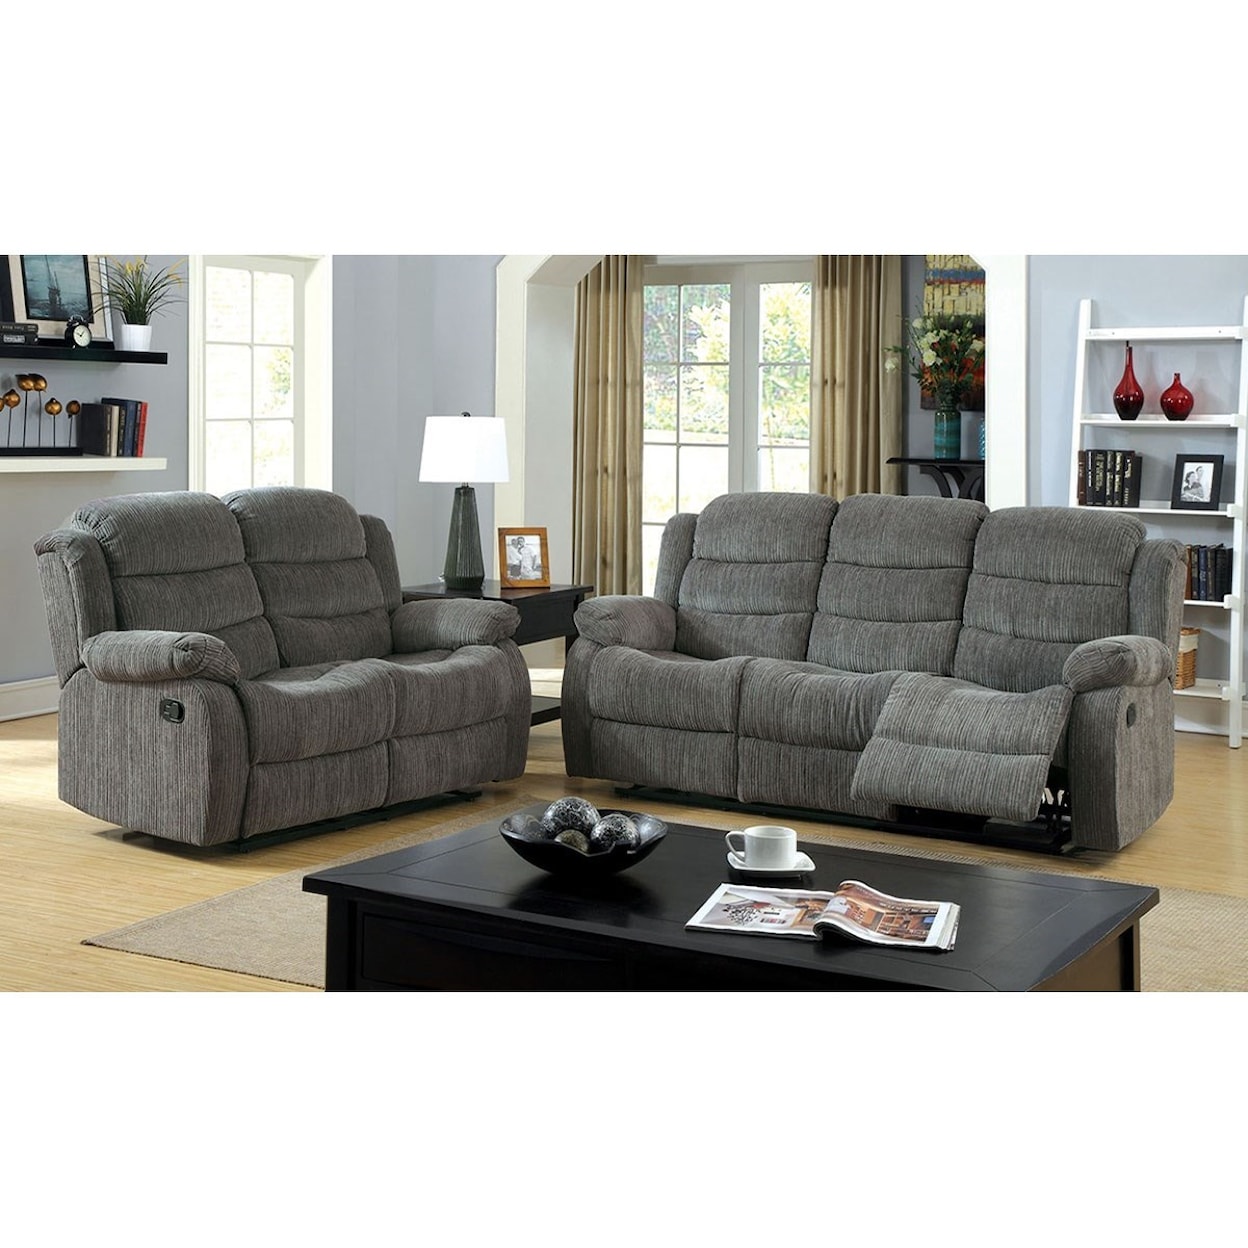 Furniture of America - FOA Millville Reclining Living Room Group